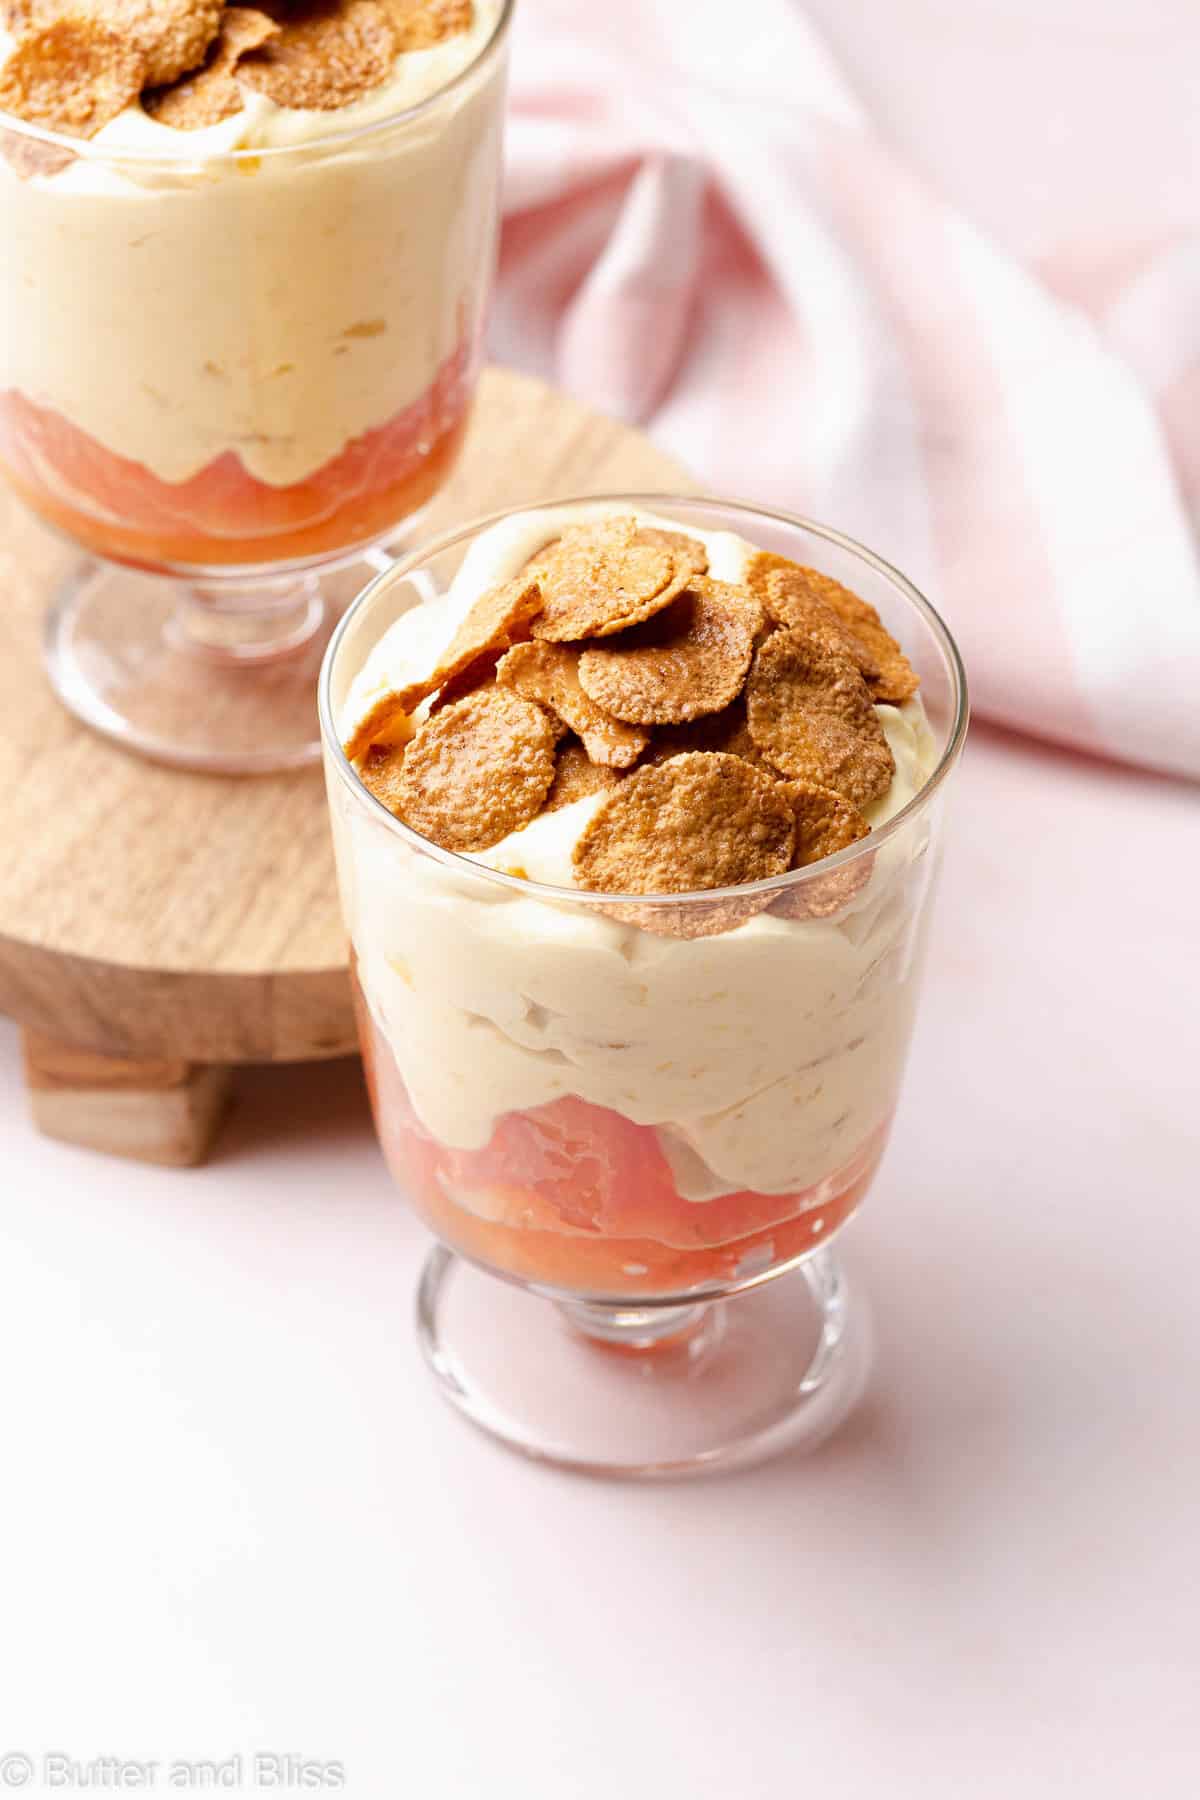 Top view of a parfait glass filled with mango grapefruit cream dessert topped with maple cornflakes